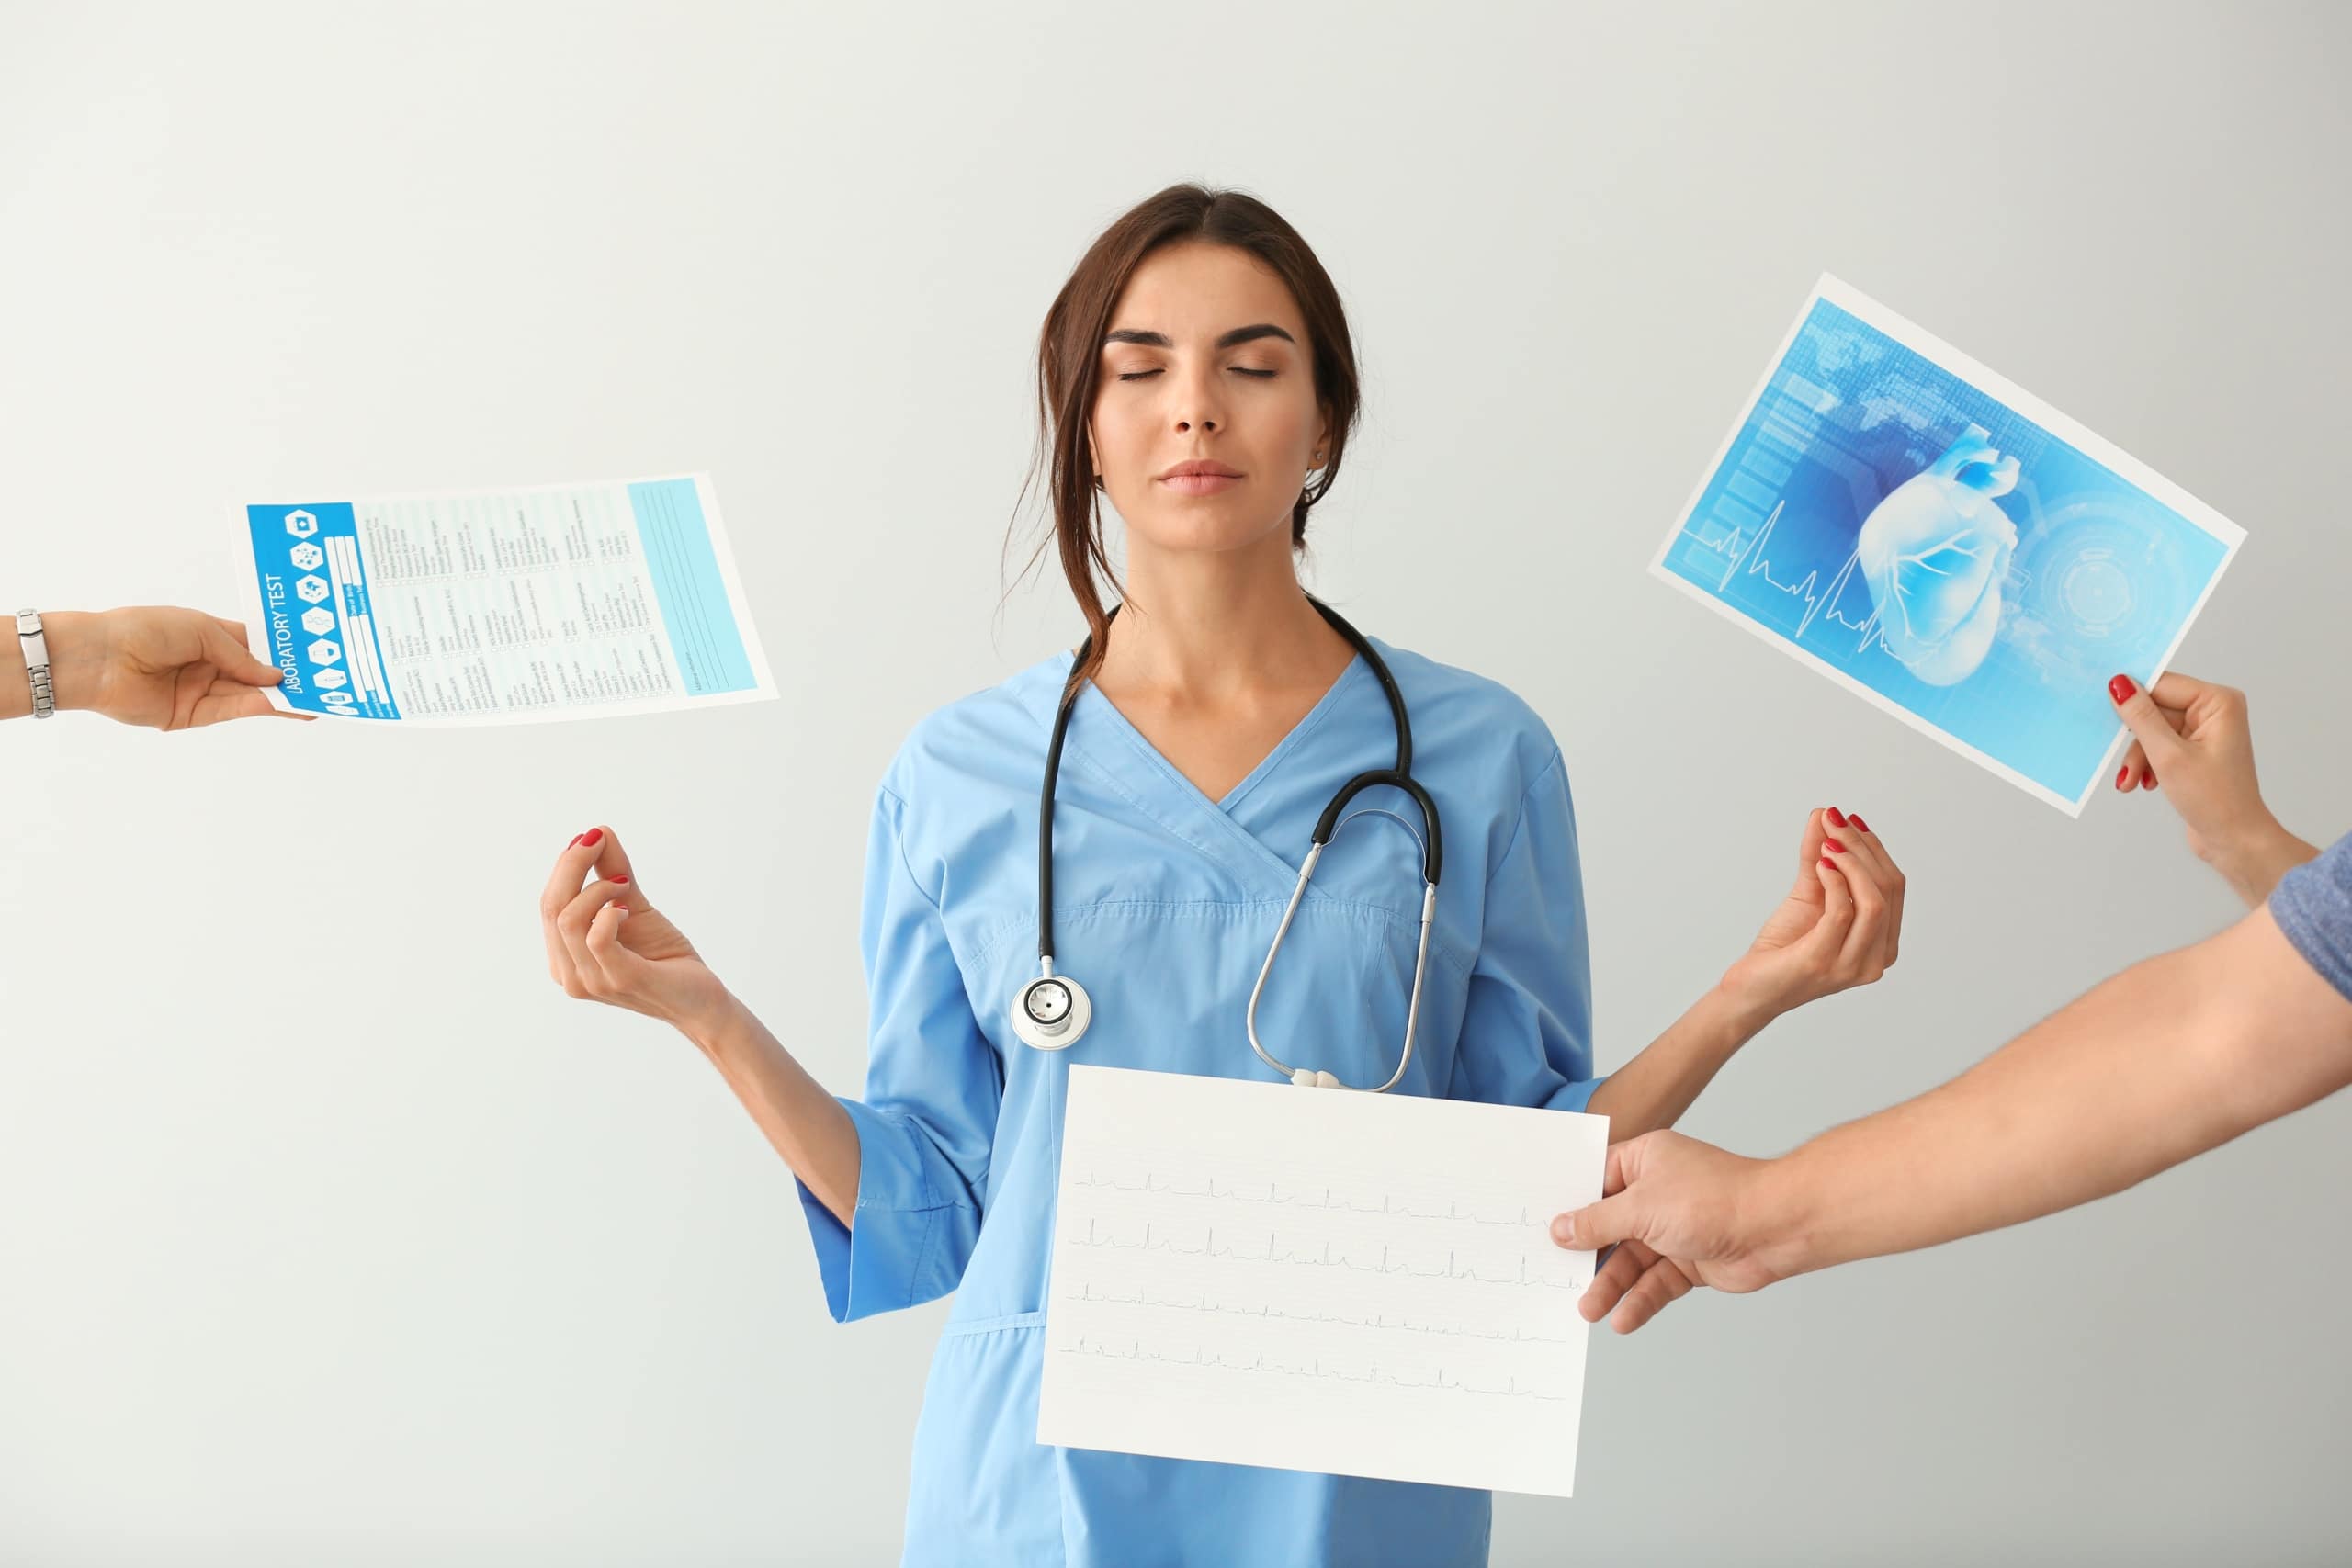 5 Simple Ways To Improve Your Life As a Nurse